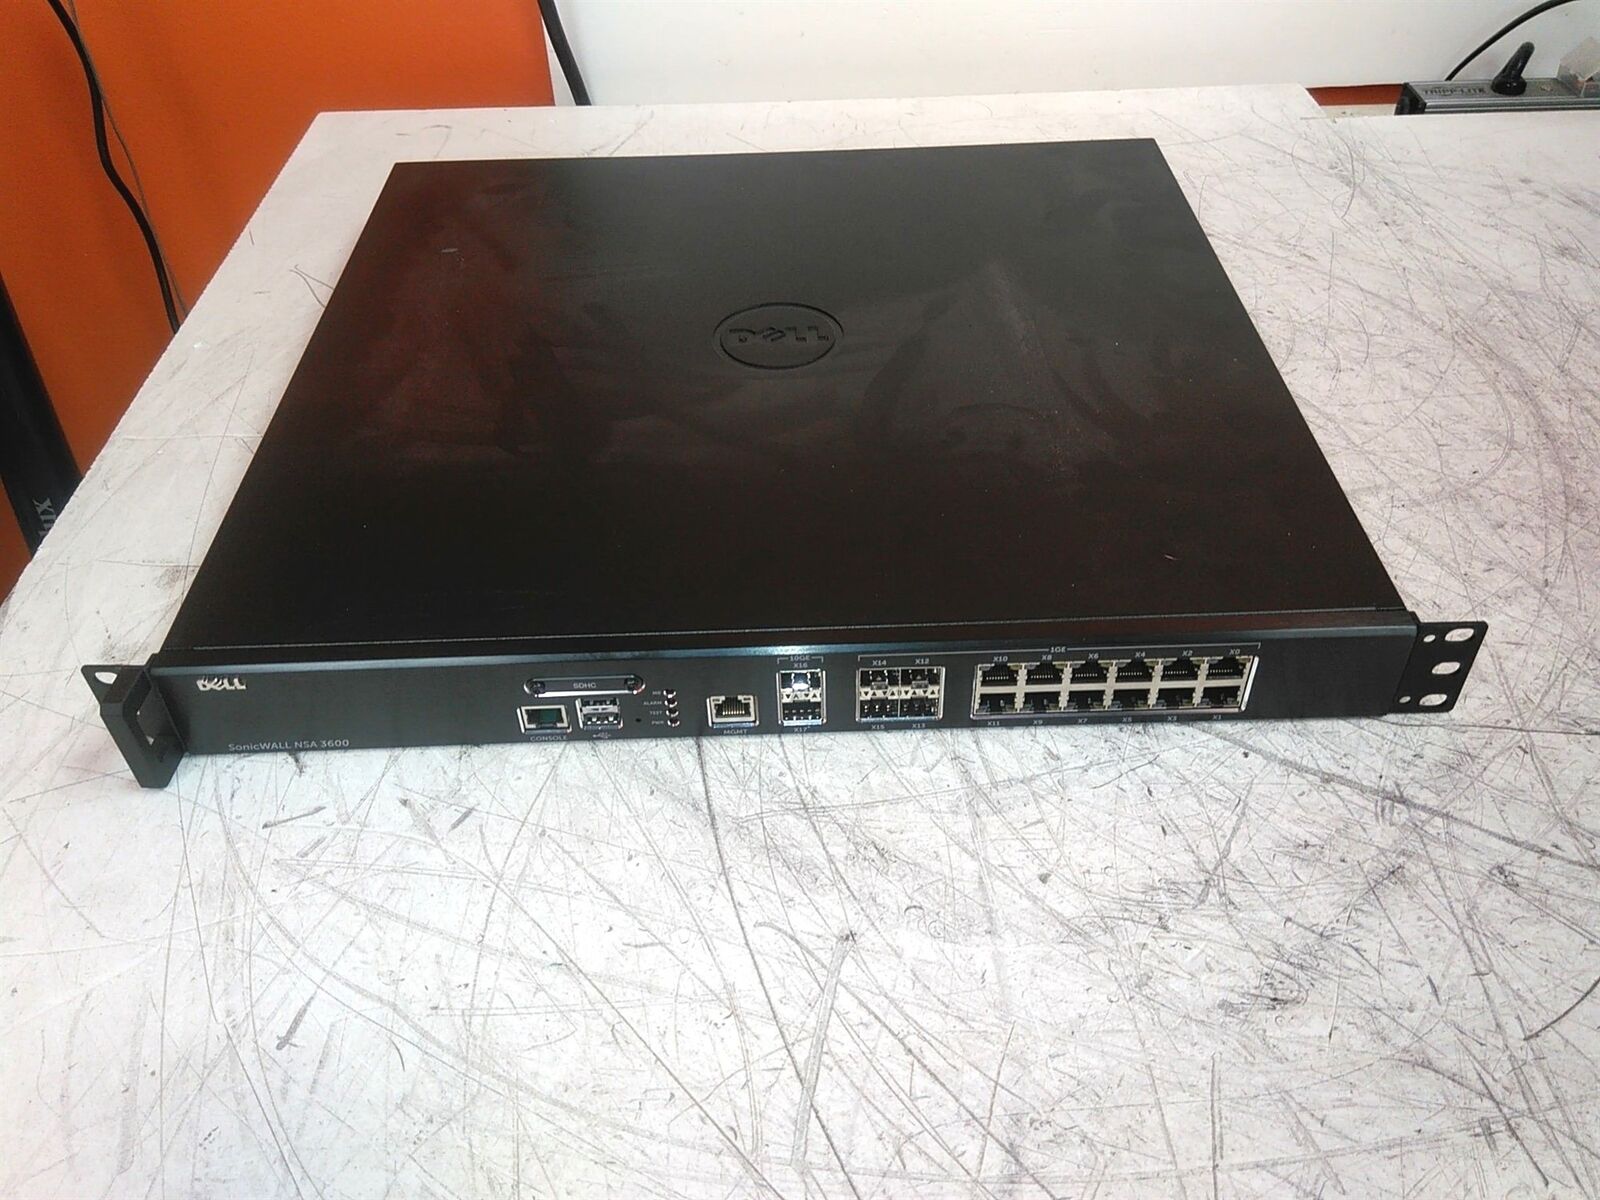 Dell SonicWall NSA 3600 1RK26-0A2 Network Security Appliance Transfer Ready